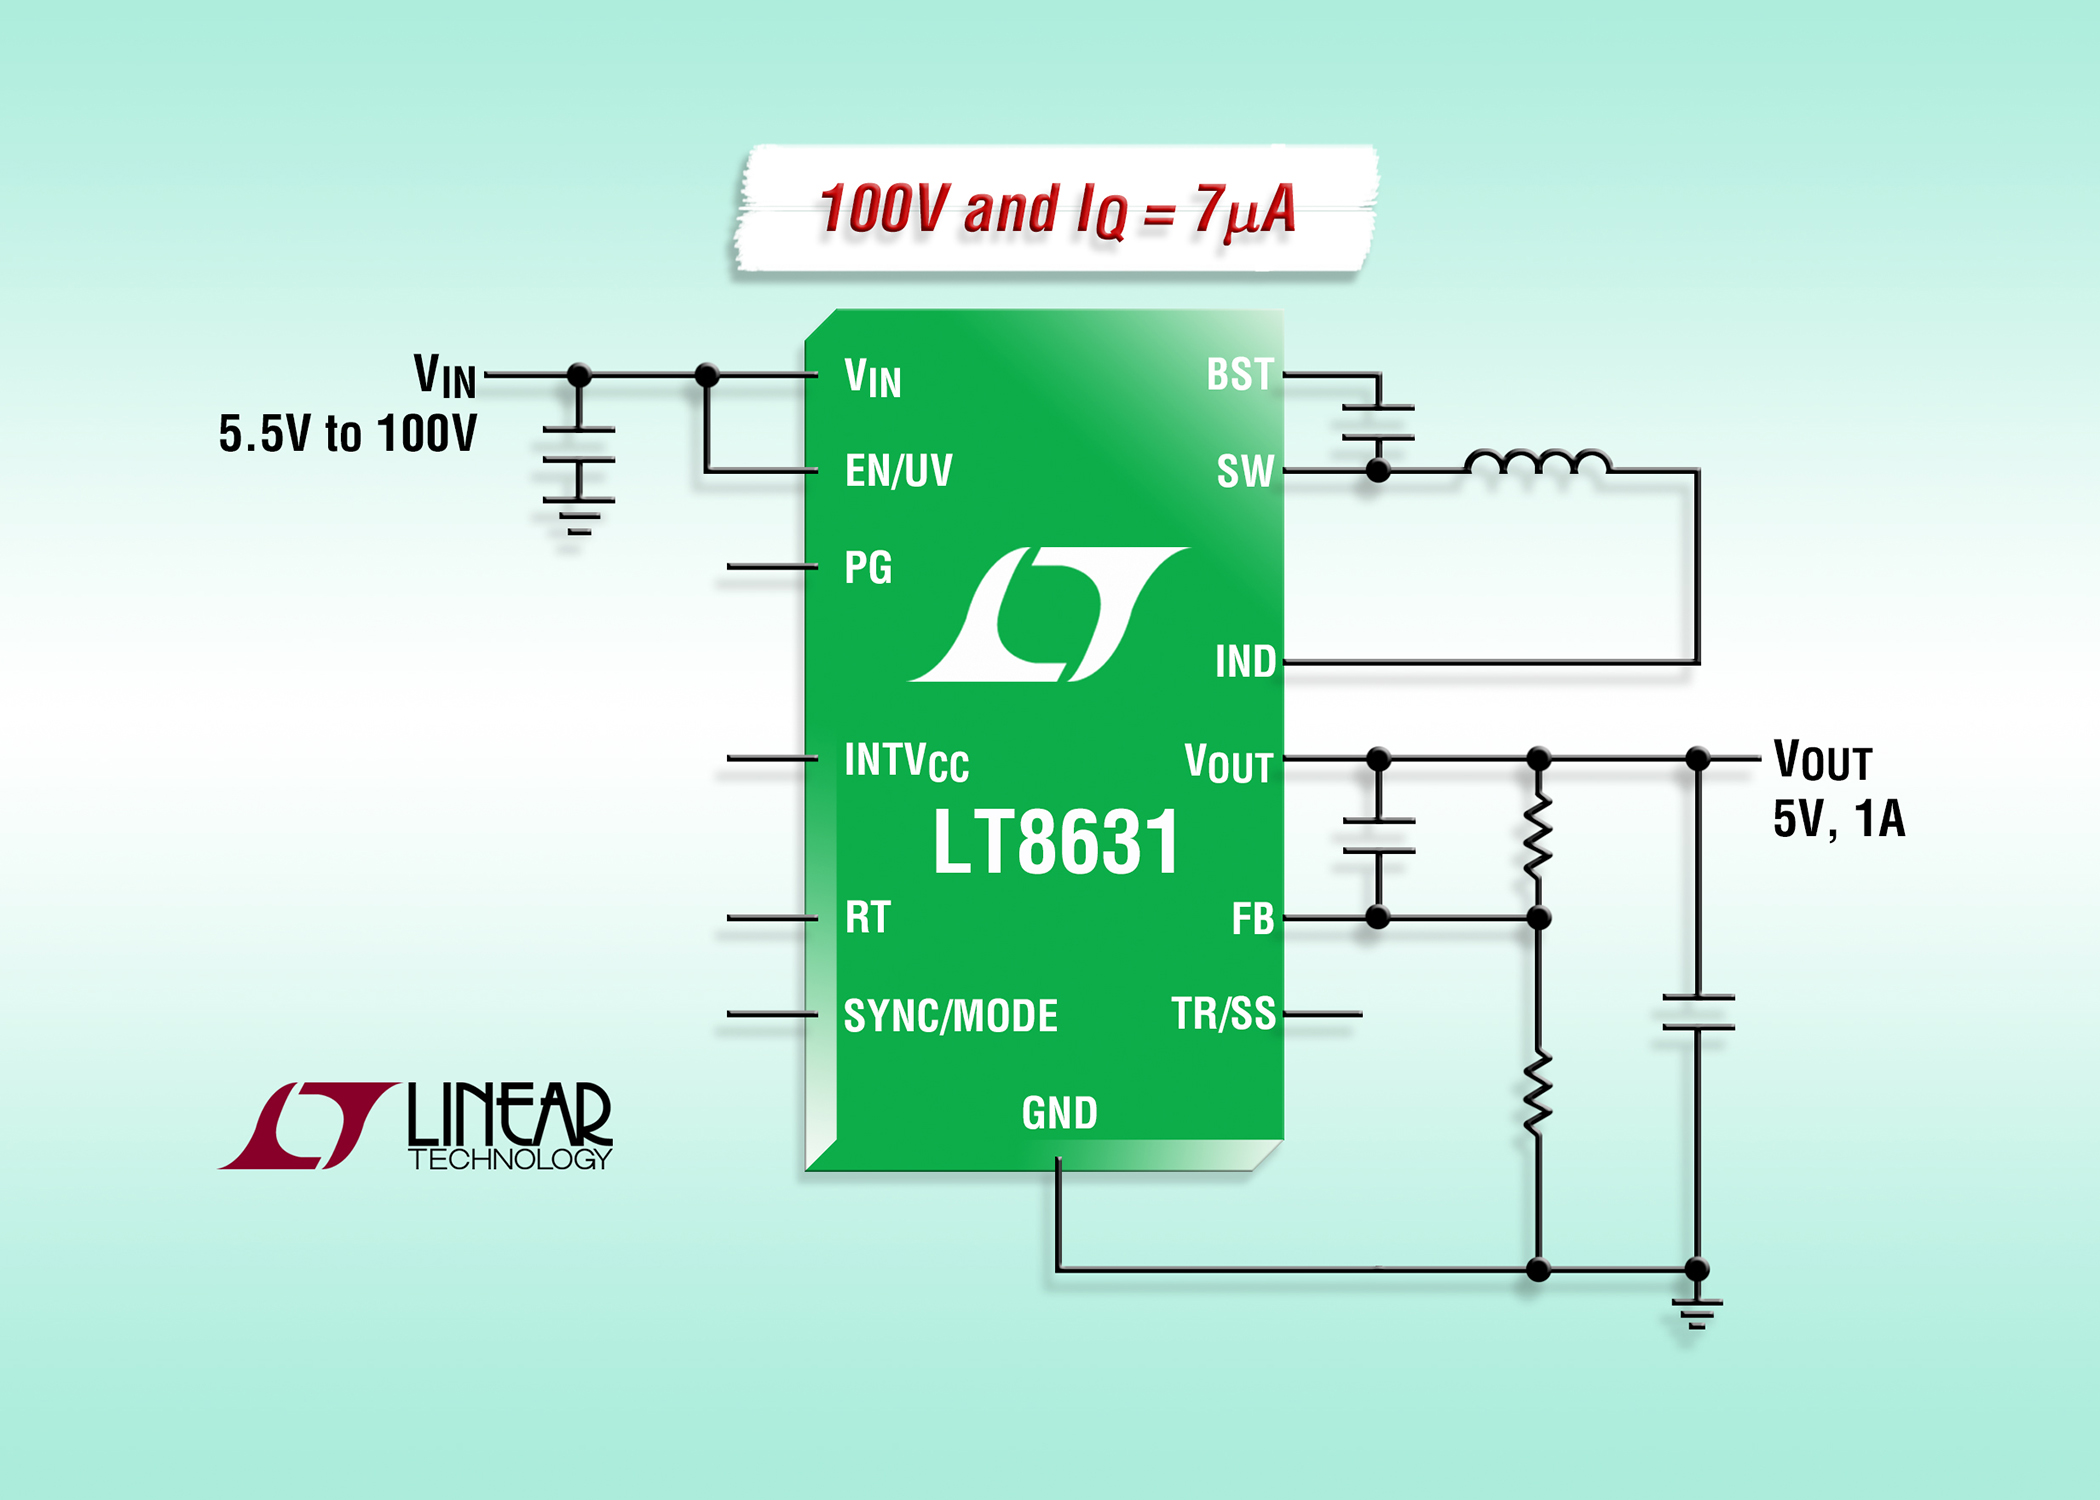 High voltage regulator is capable of low voltage output